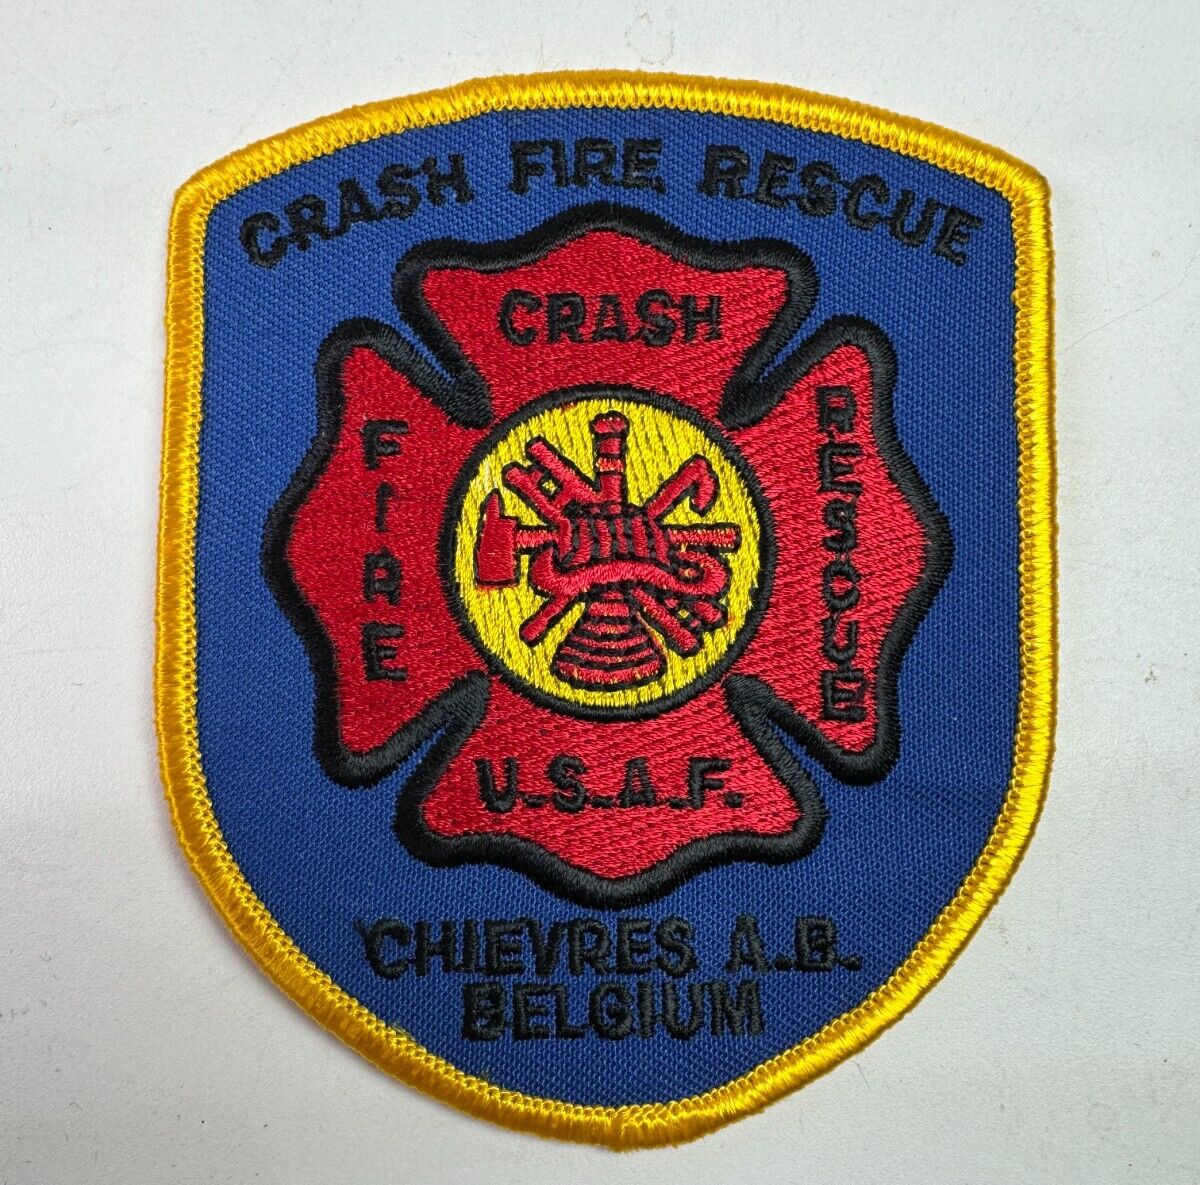 Chievres Air Base Belgium Crash Fire Rescue USAF US Air Force Military Patch H10